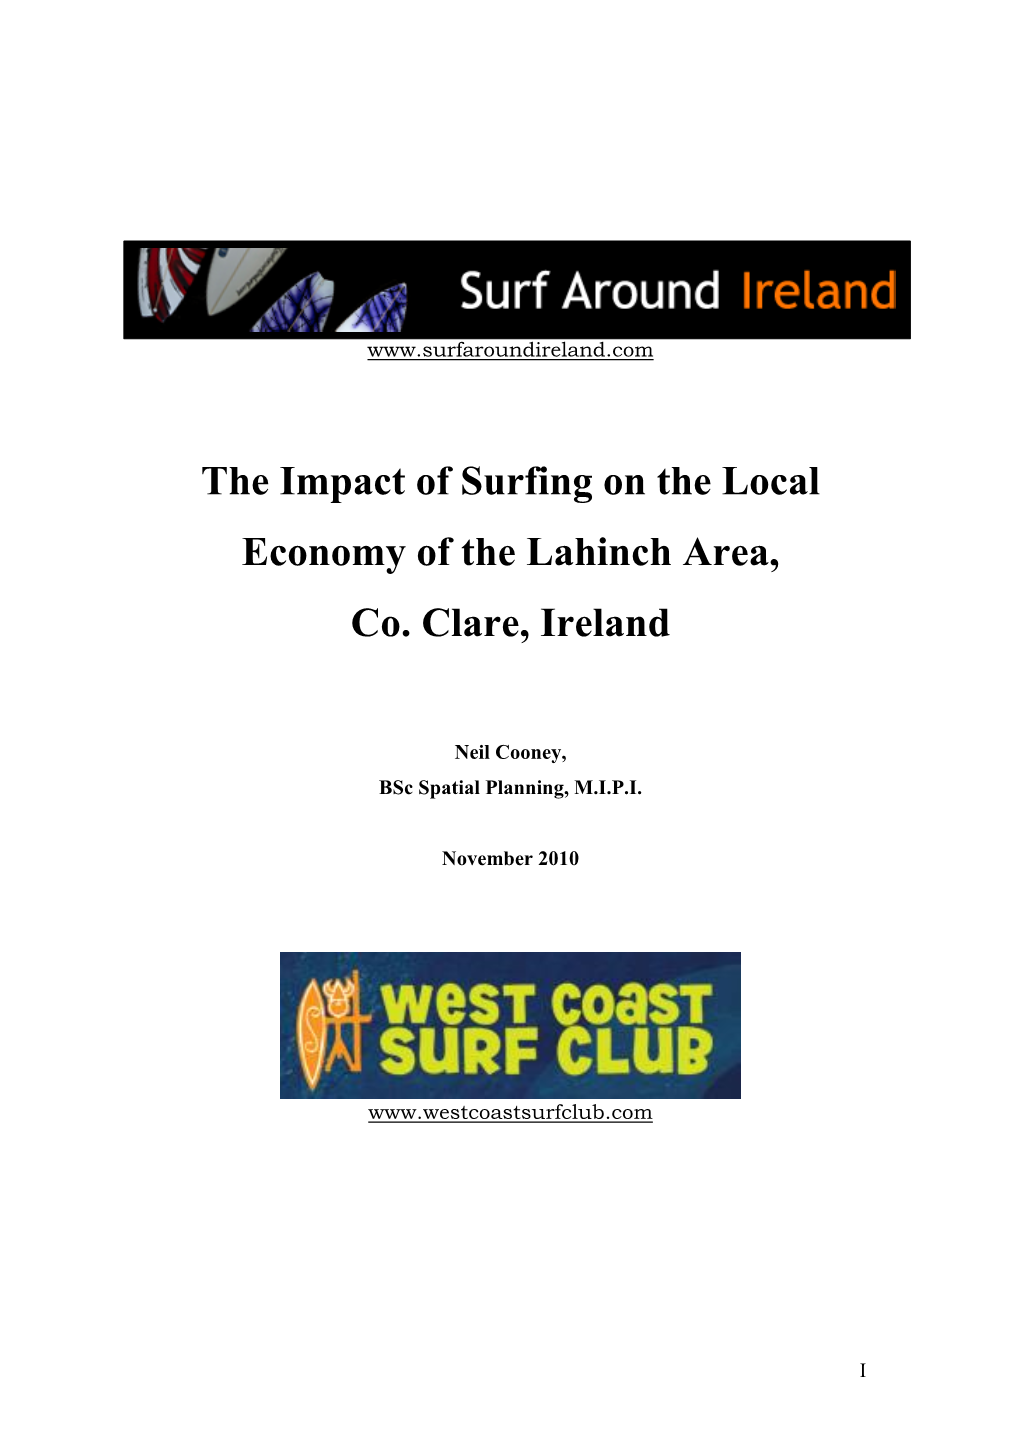 The Impact of Surfing on the Local Economy of the Lahinch Area, Co. Clare, Ireland